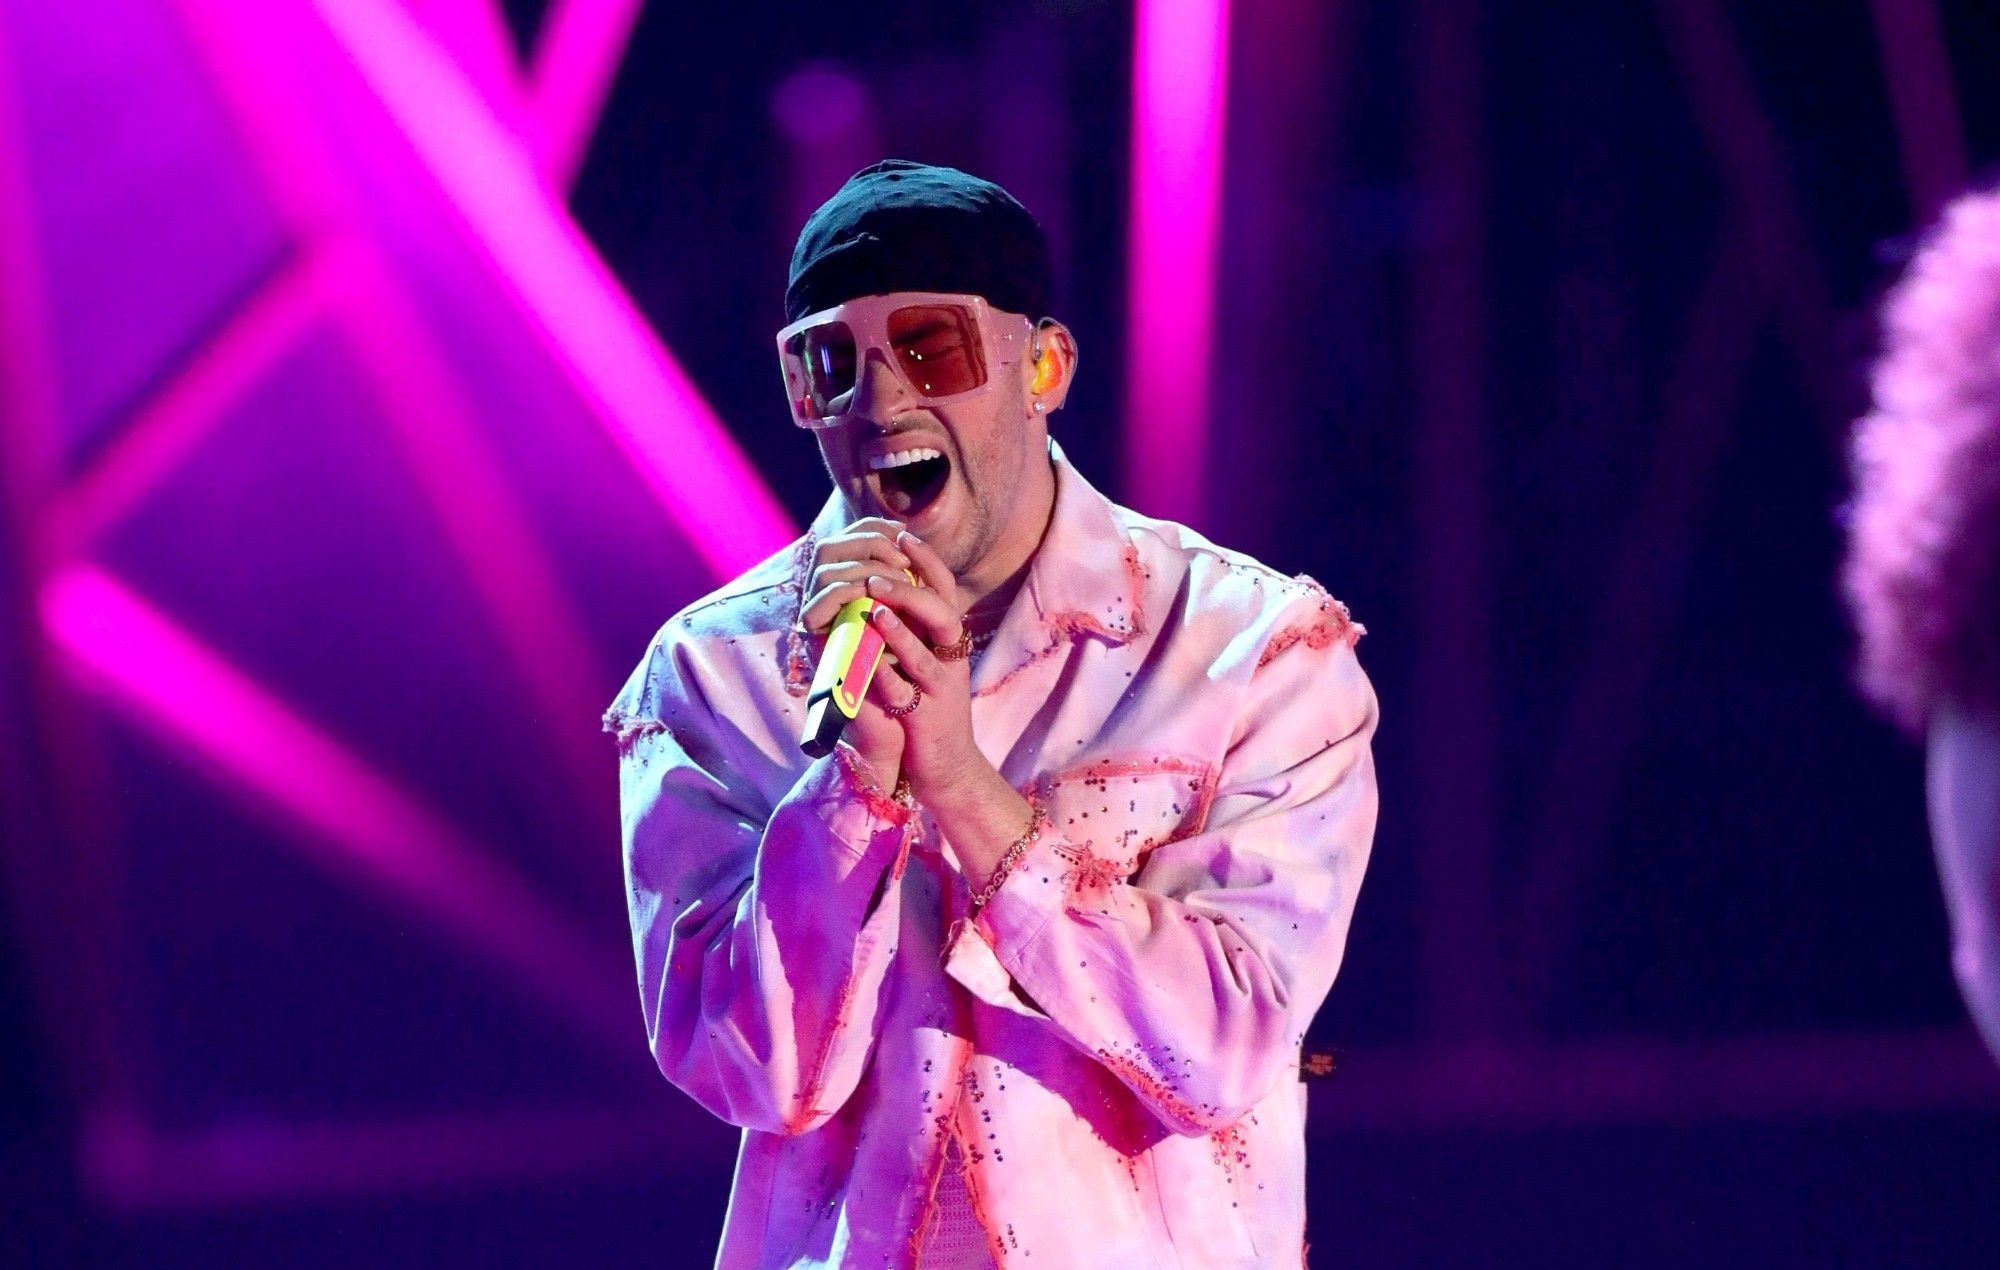 Watch Bad Bunny perform 'Booker T' at .nme.com